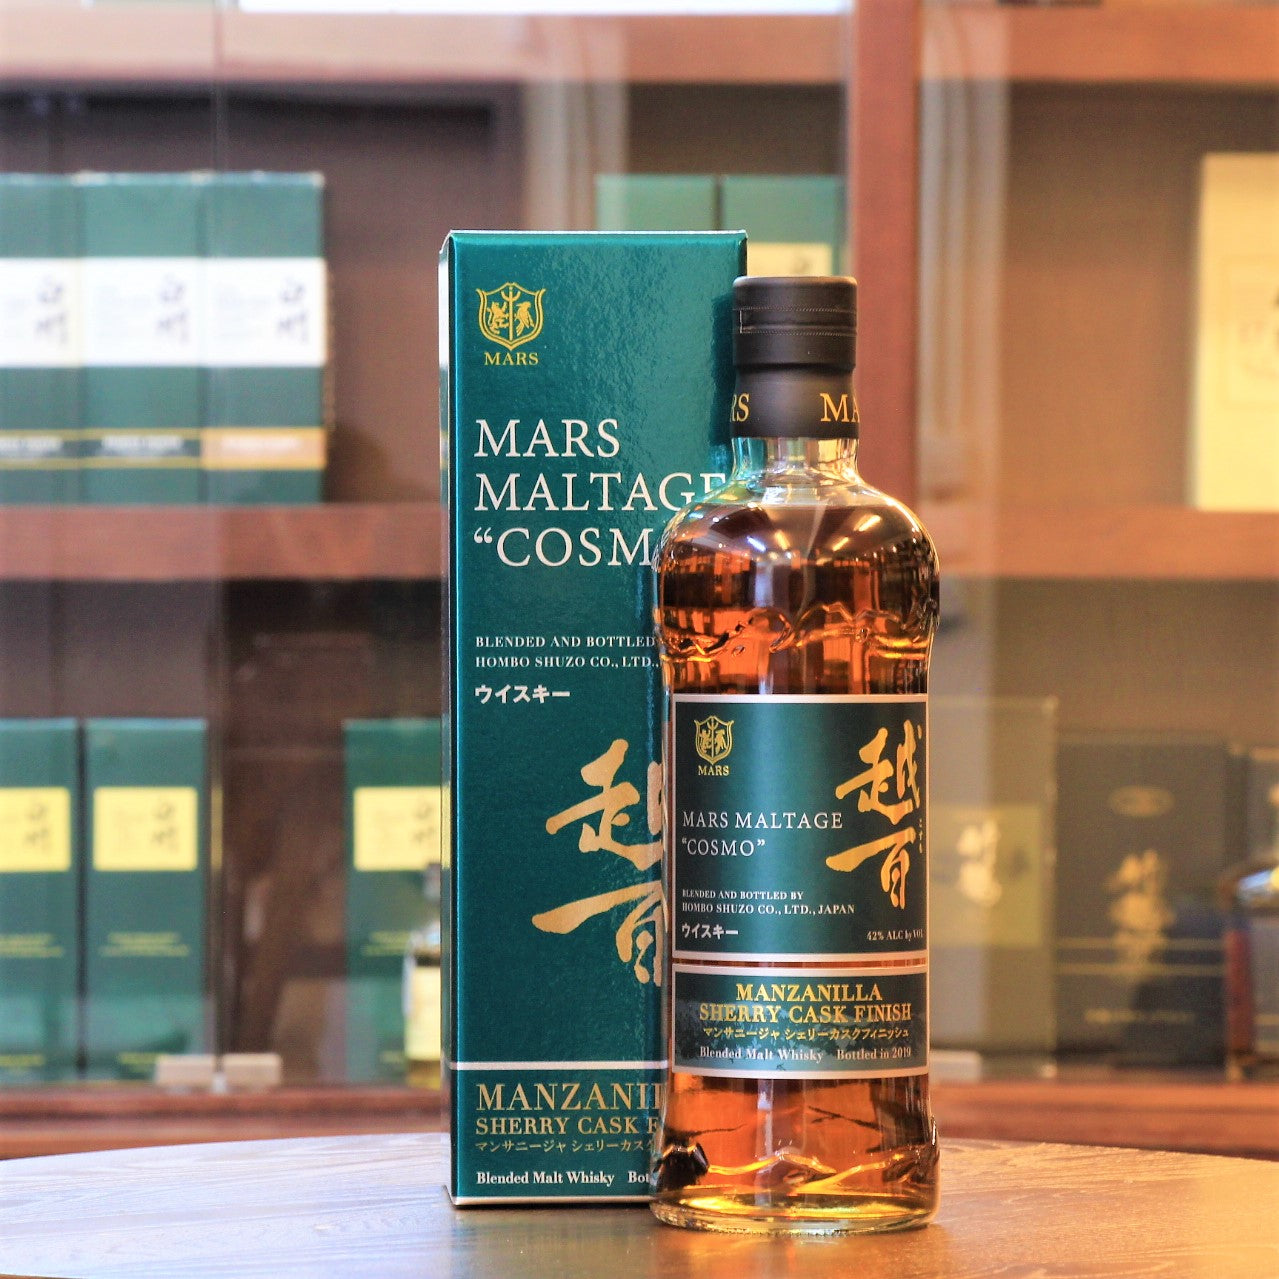 Blended malt Whisky, Manzanilla sherry Cask, Mars maltage Cosmo , product in Japan